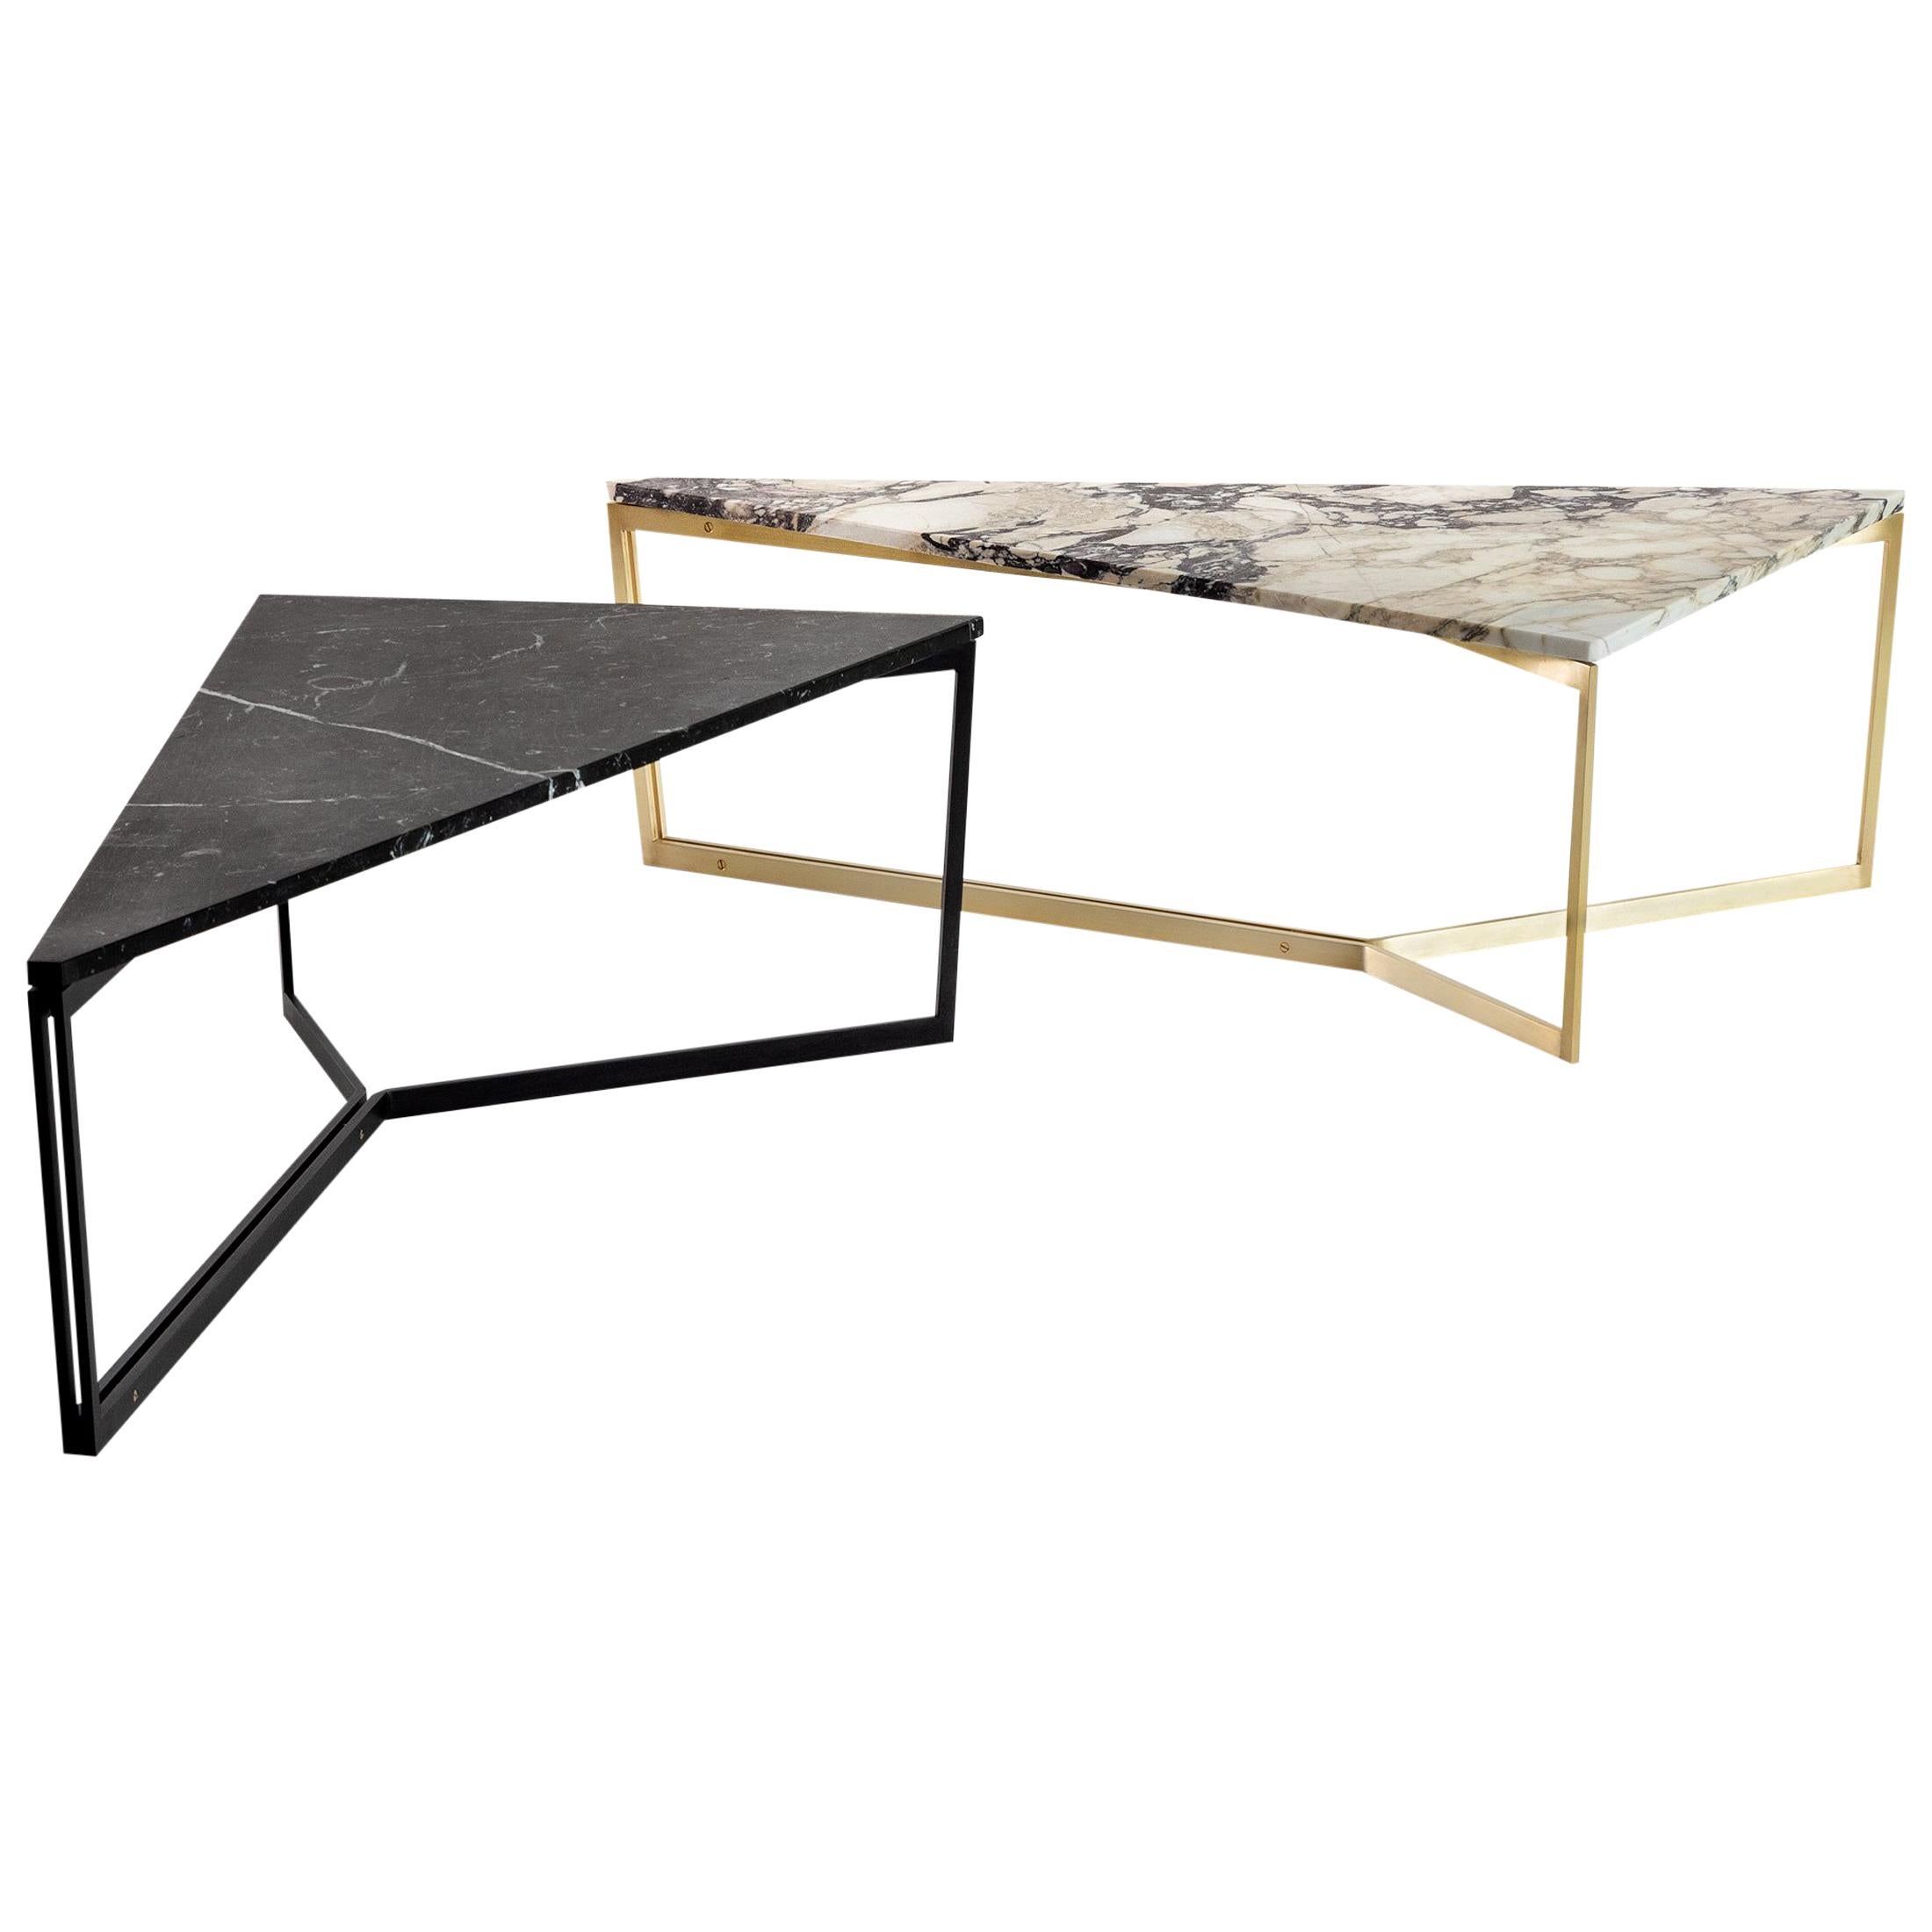 AT14, Triangular Coffee Table with Blackened Steel Base and Marble Top